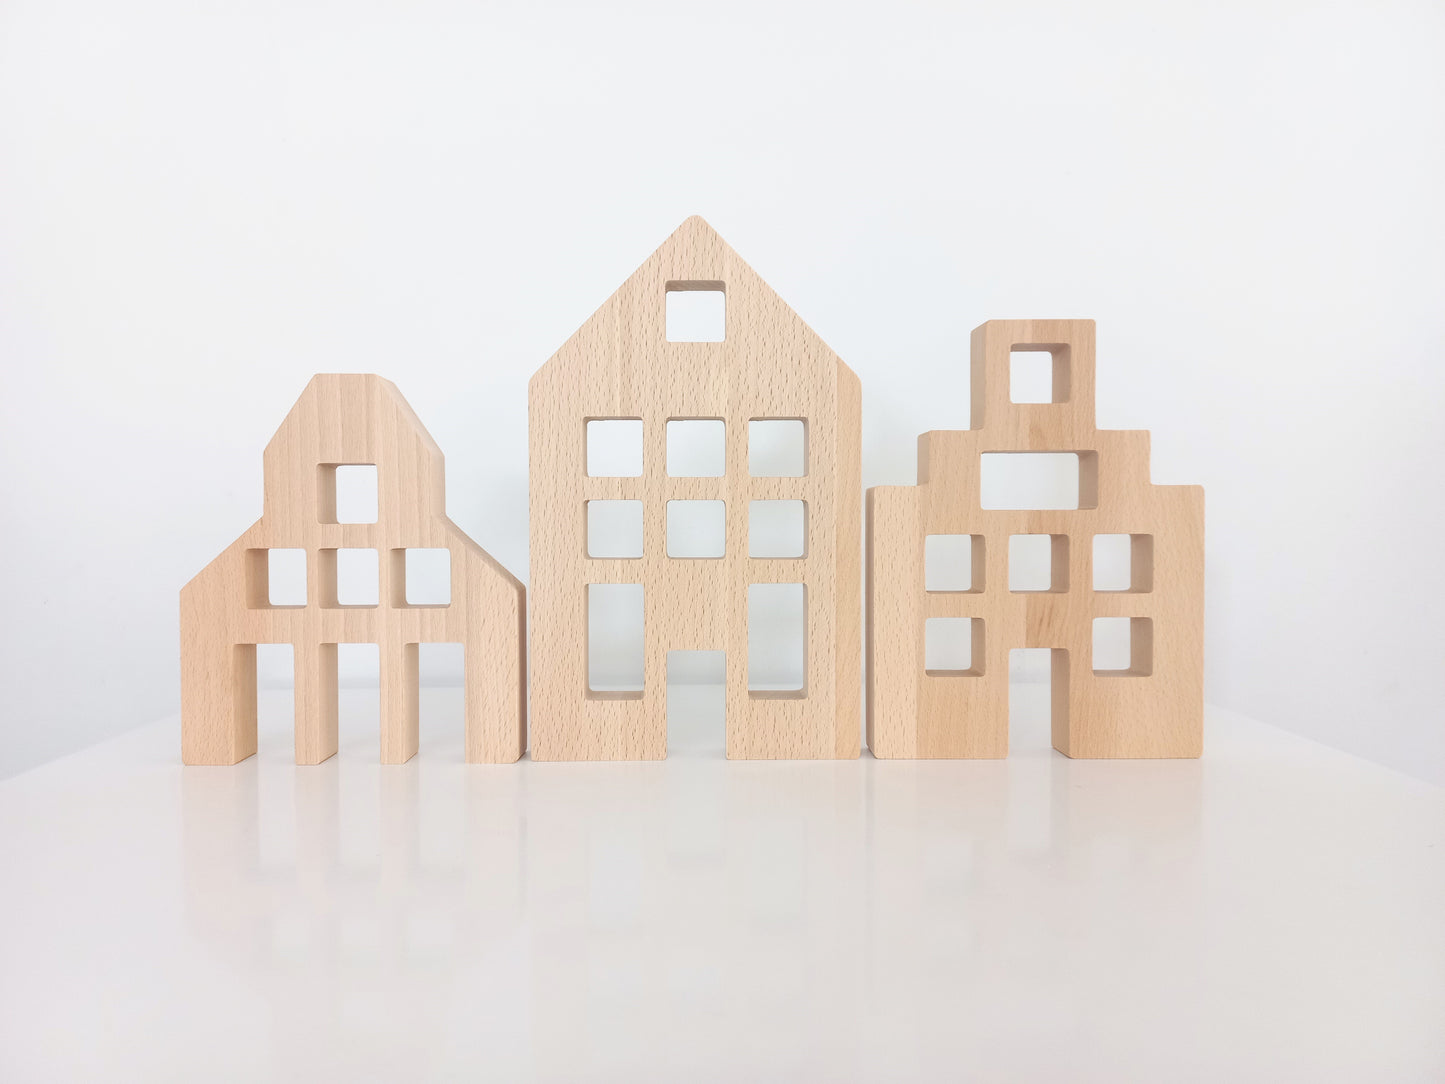 Patch Houses